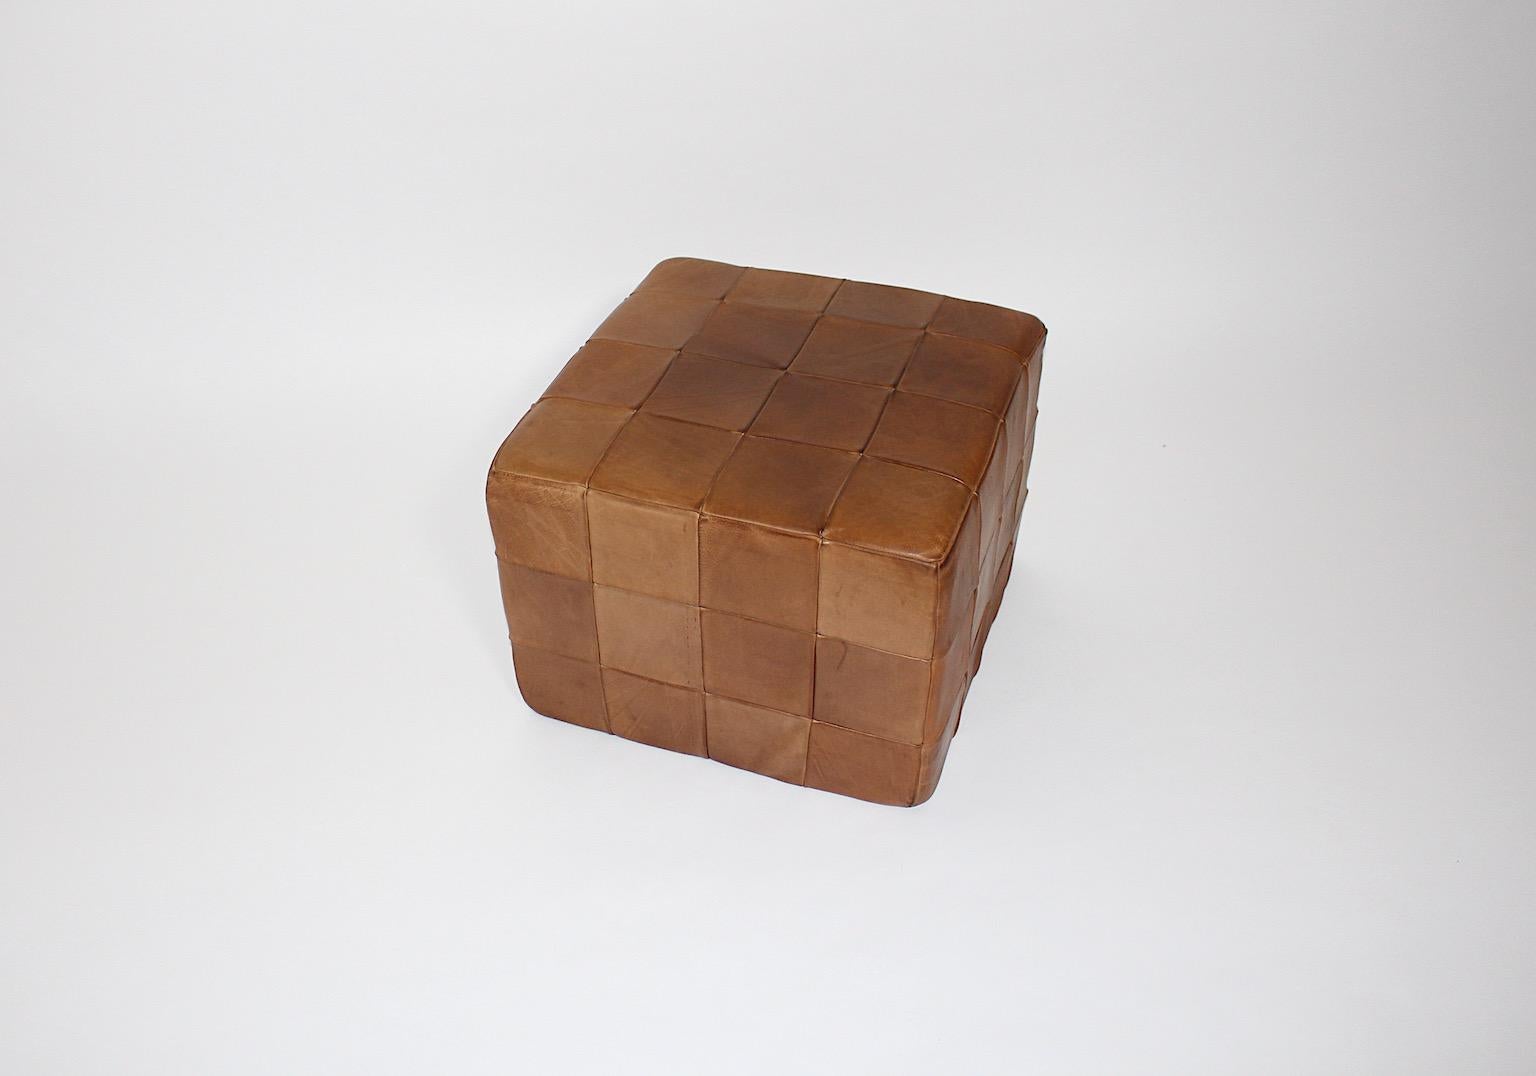 Modernist Organic Vintage Brown Patchwork Leather Cubus Stool DeSede 1970s For Sale 10